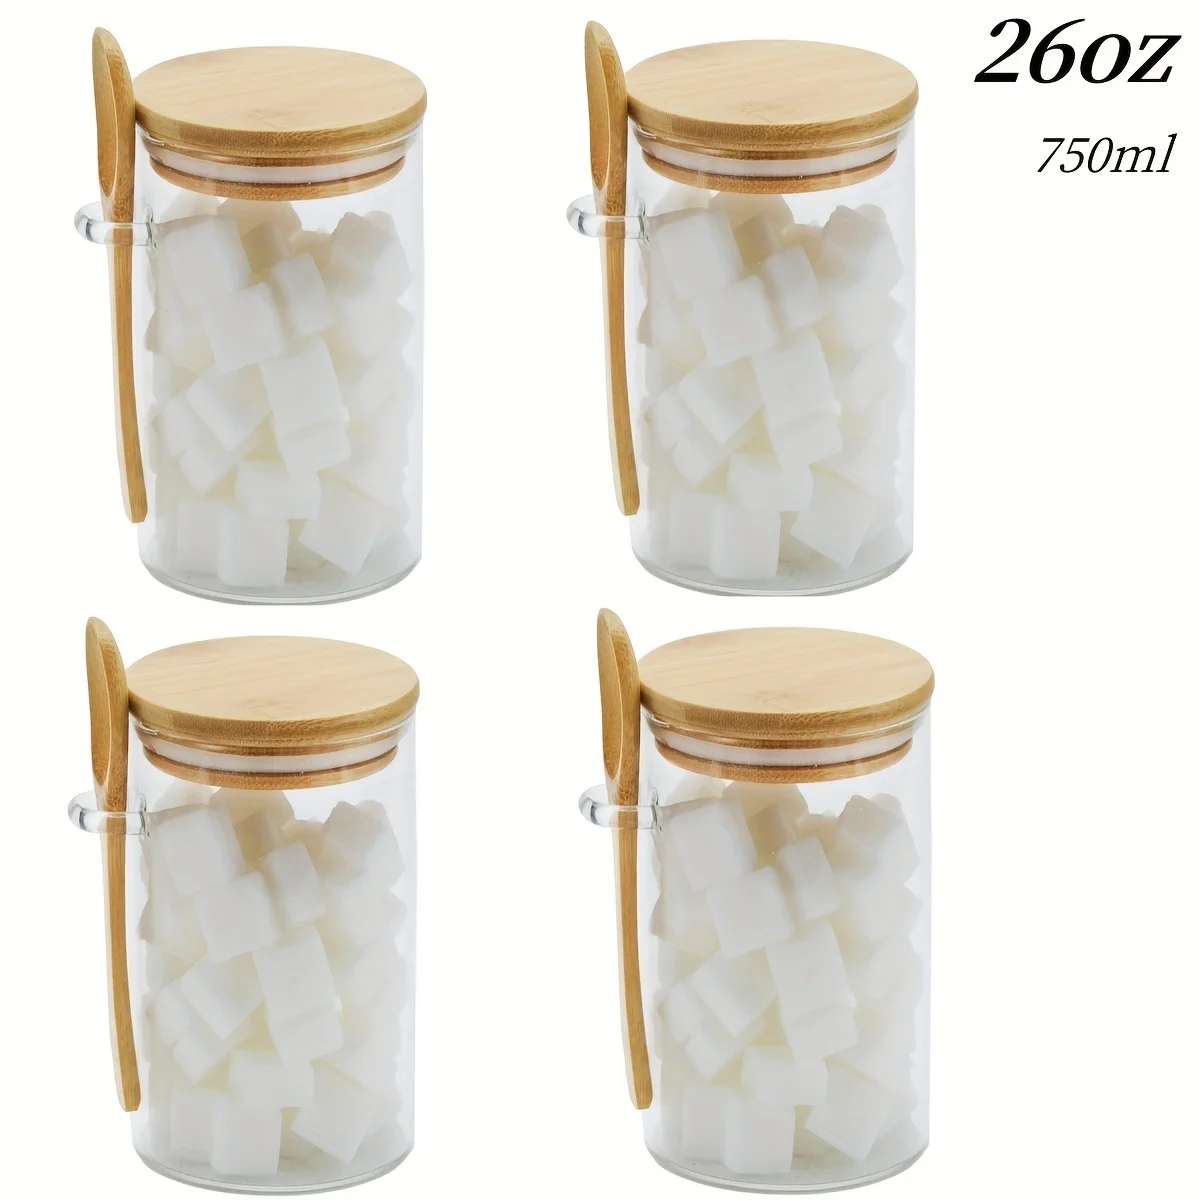 https://ae01.alicdn.com/kf/S6a75011e66bb44bab1b26199bf664aaeO/Glass-Jars-With-Airtight-Lids-And-Spoon-Glass-Storage-Jars-Food-Storage-Containers-For-Tea-Coffee.jpg